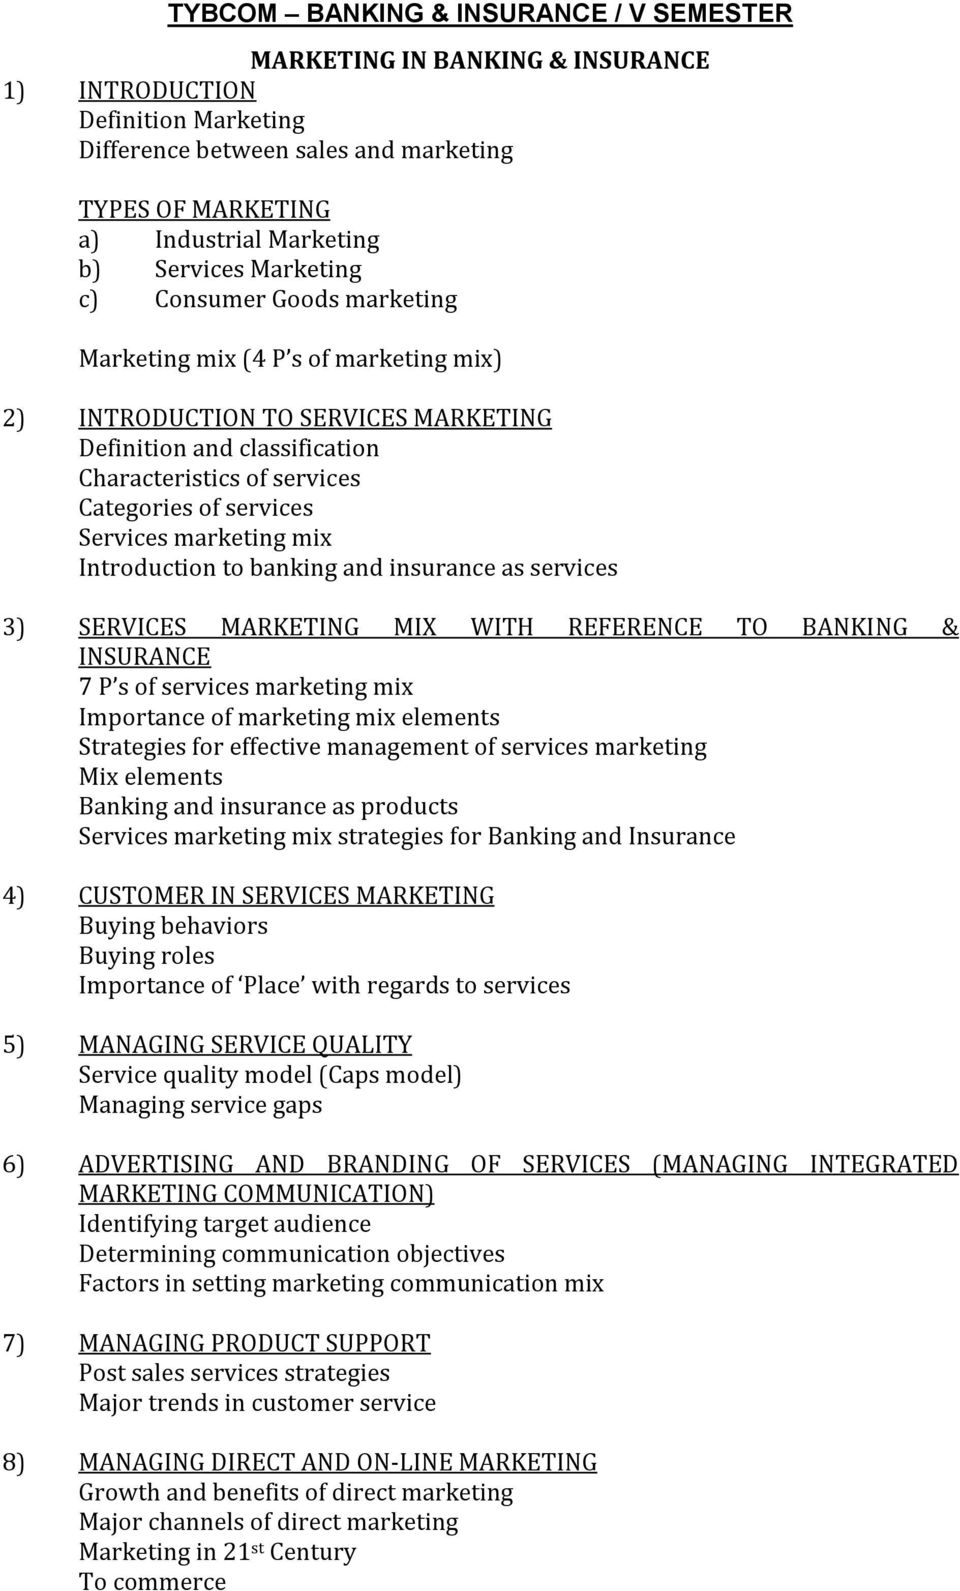 Introduction to banking and insurance as services 3) SERVICES MARKETING MIX WITH REFERENCE TO BANKING & INSURANCE 7 P s of services marketing mix Importance of marketing mix elements Strategies for